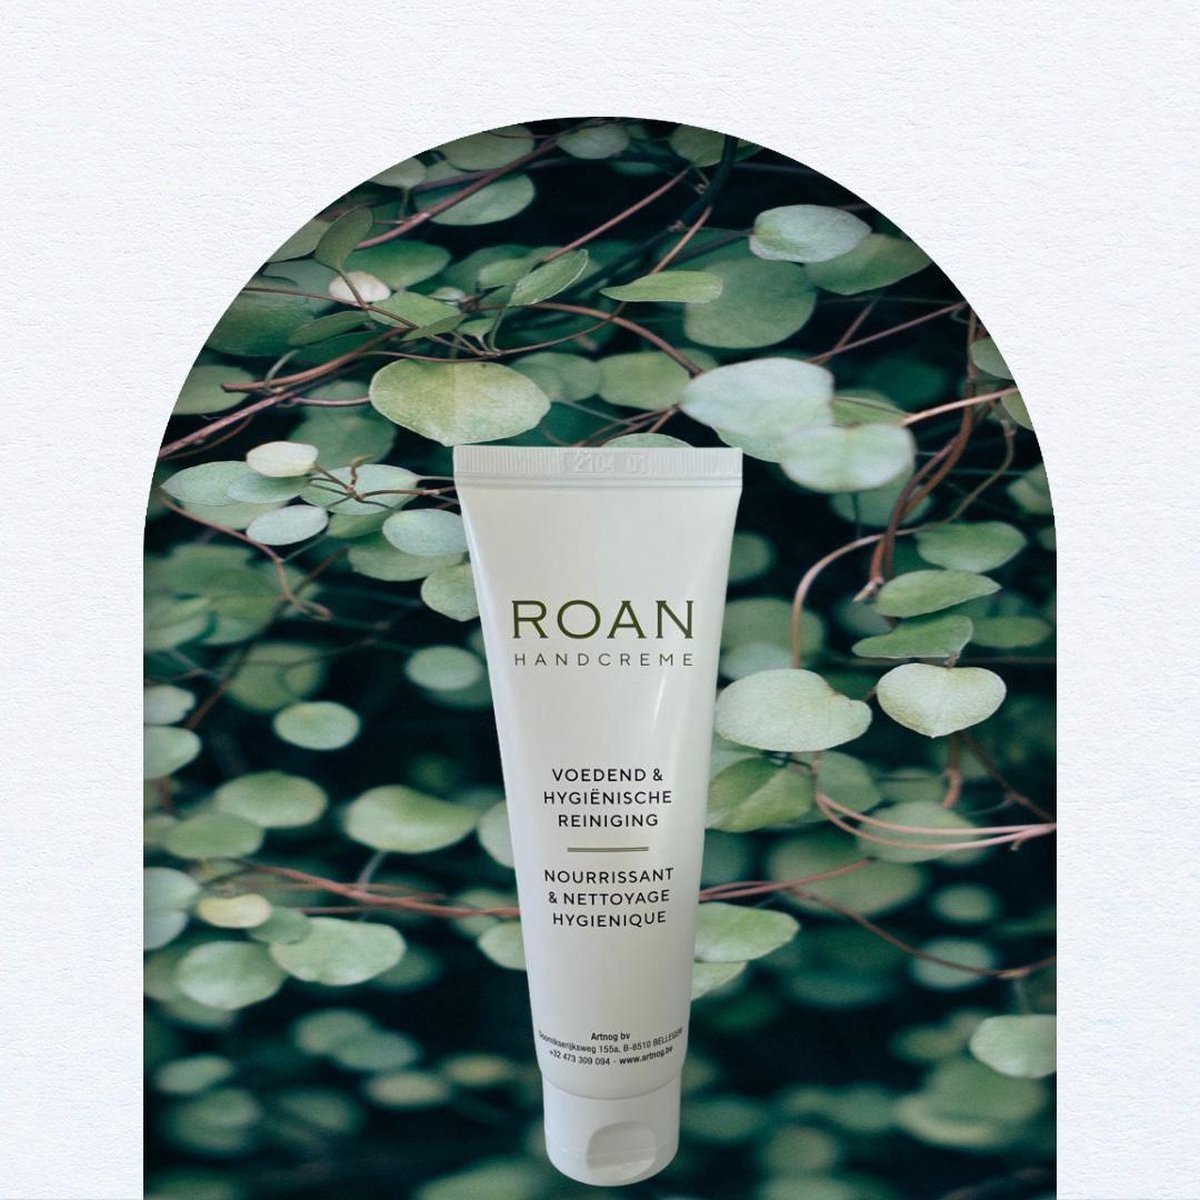 ROAN HANDCREME disinfect and protect 70% ethanol